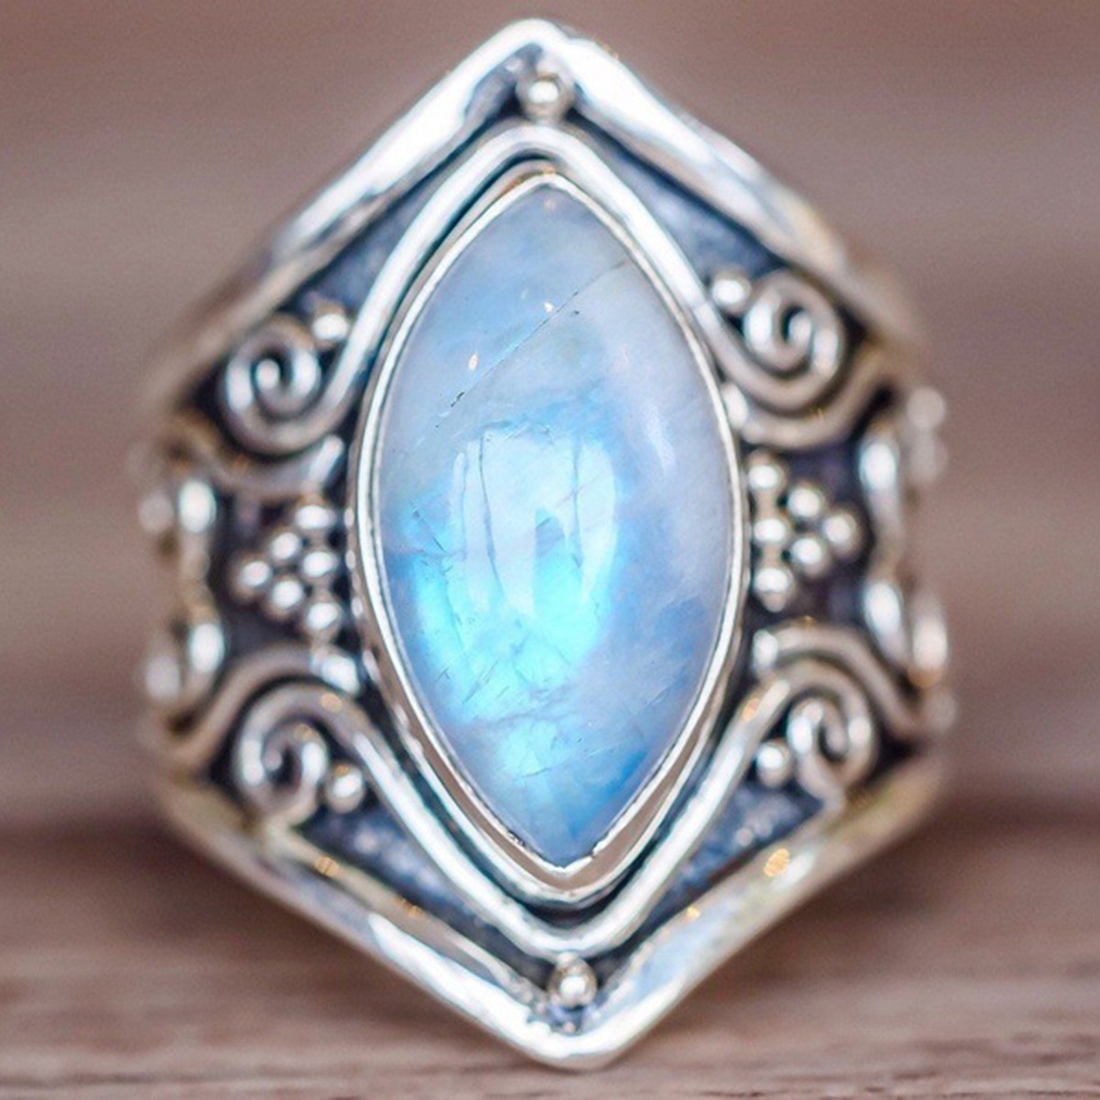 Ethnic-Moonstone-Finger-Ring-Vintage-Finger-Rings-Accessories-Gift-Jewelry-for-Women-1326513